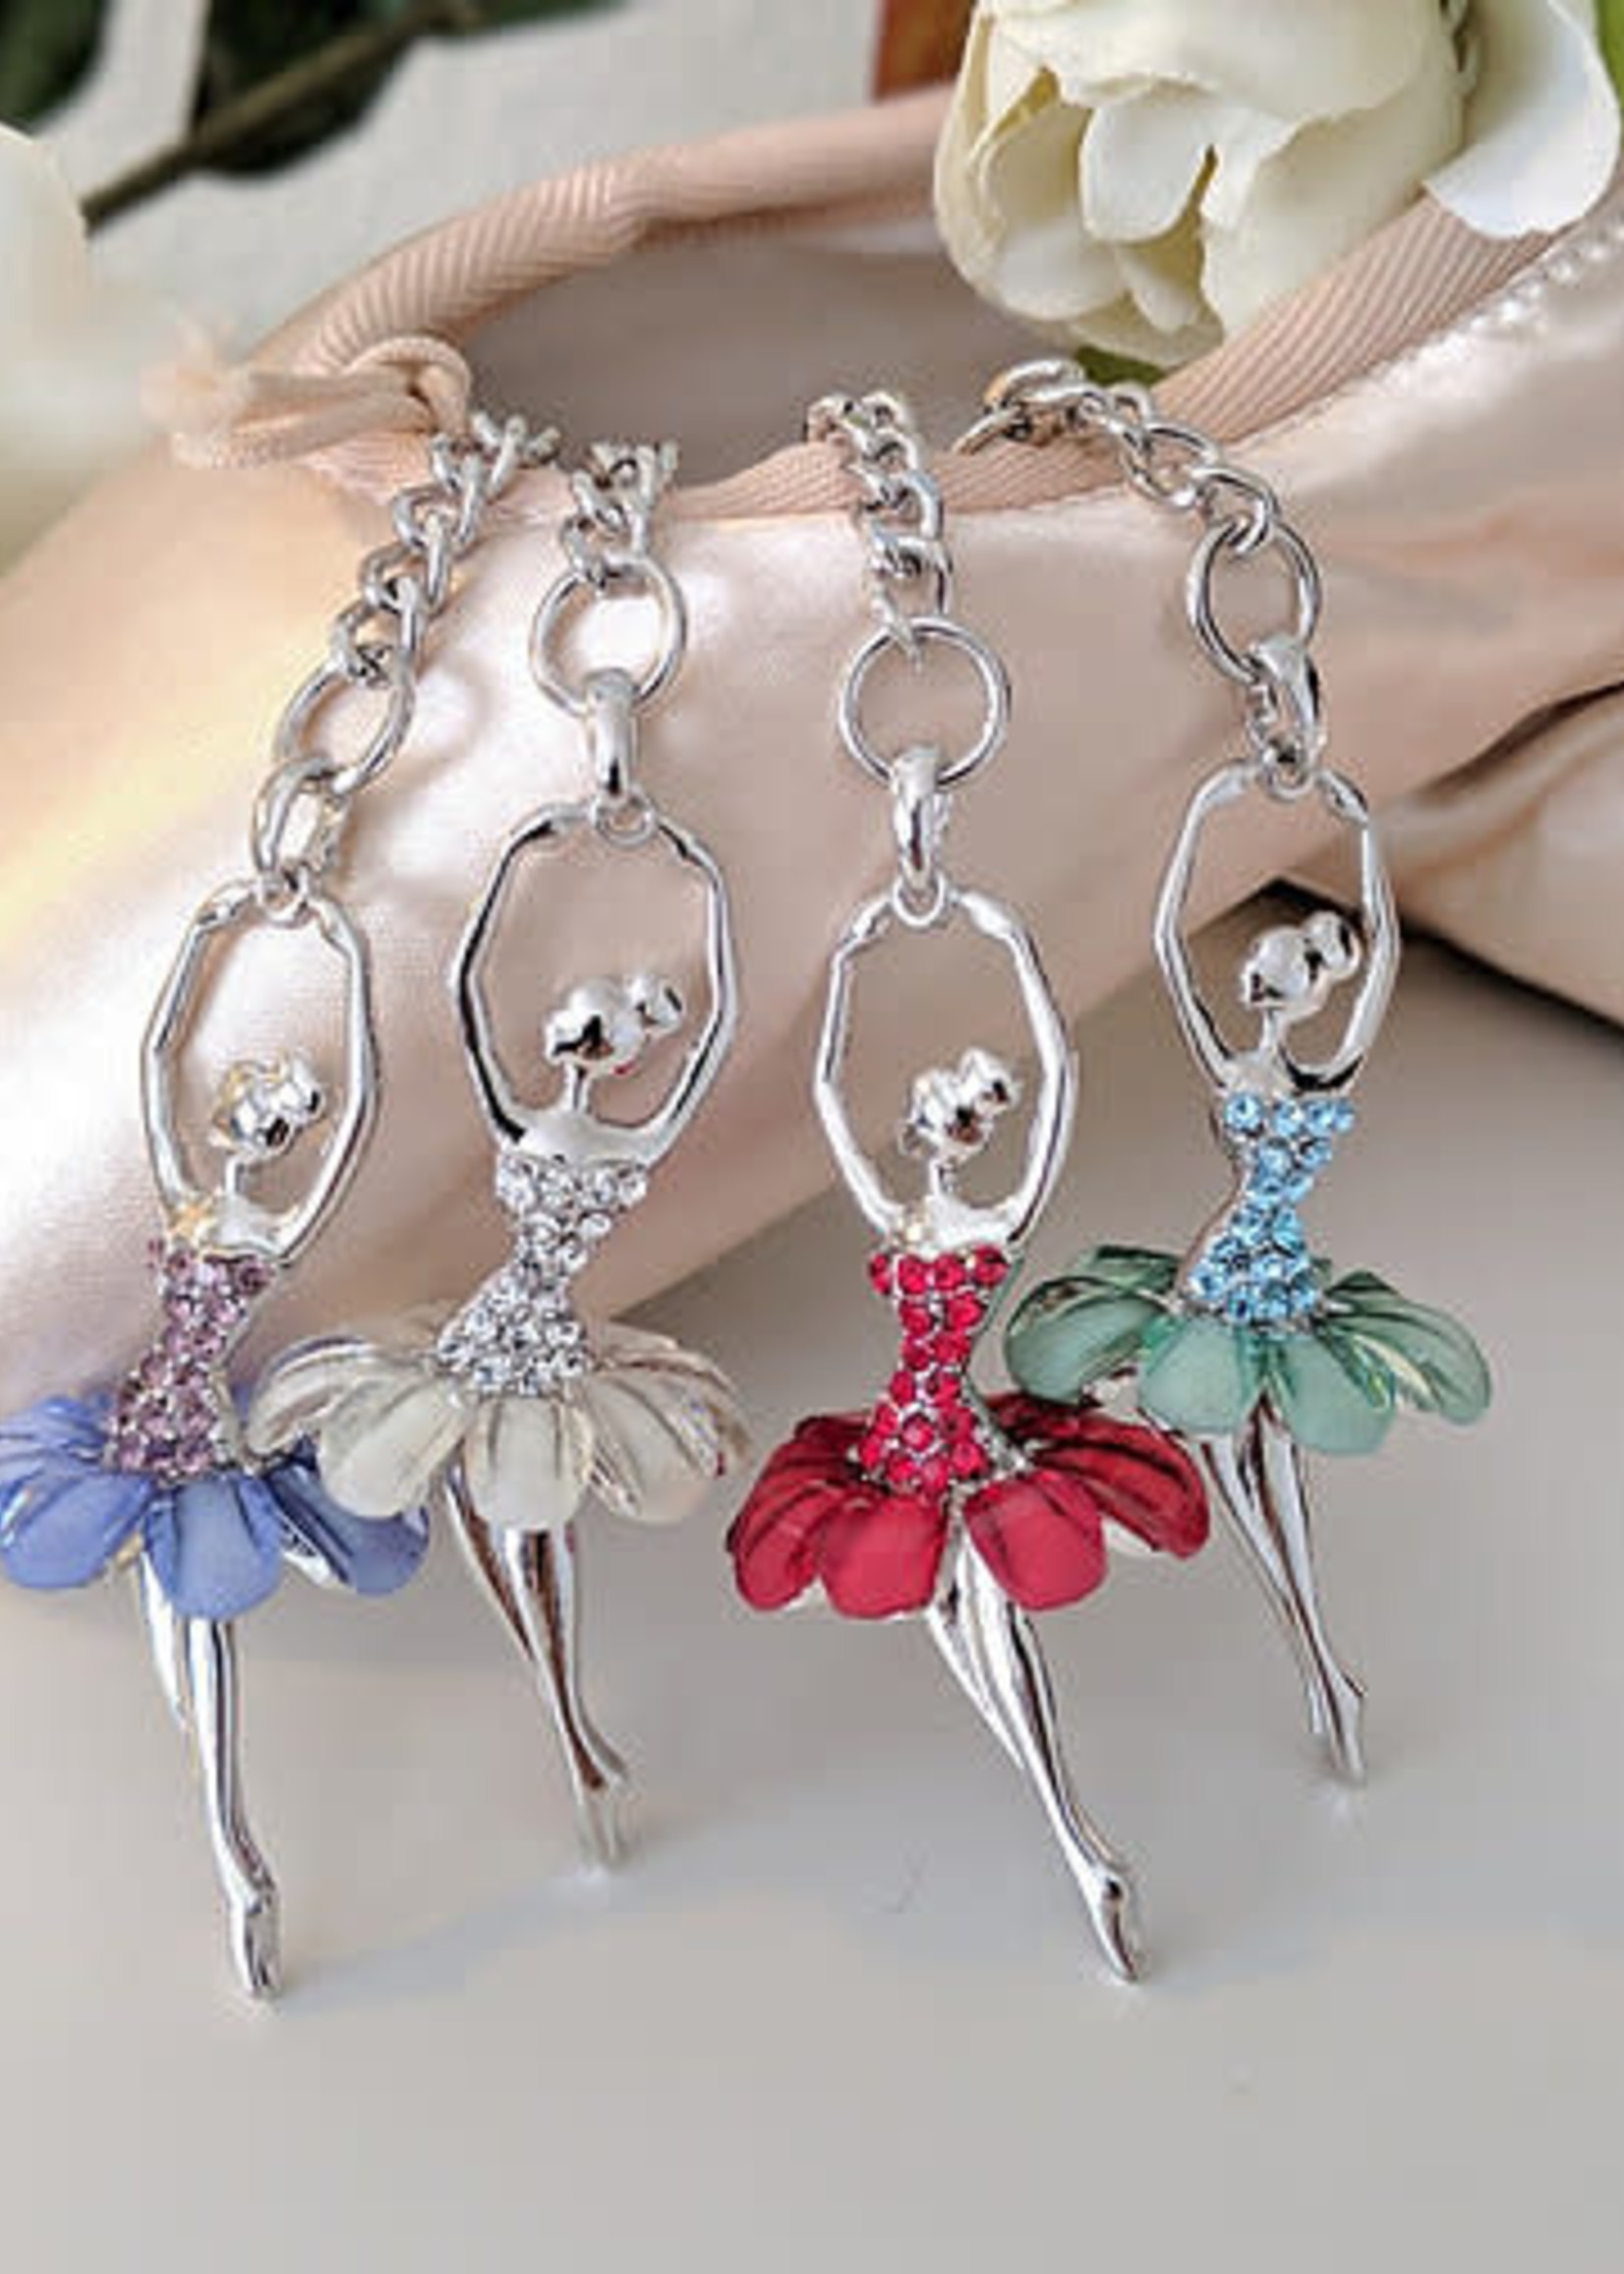 Ballerina Silver Keychain Arms Up